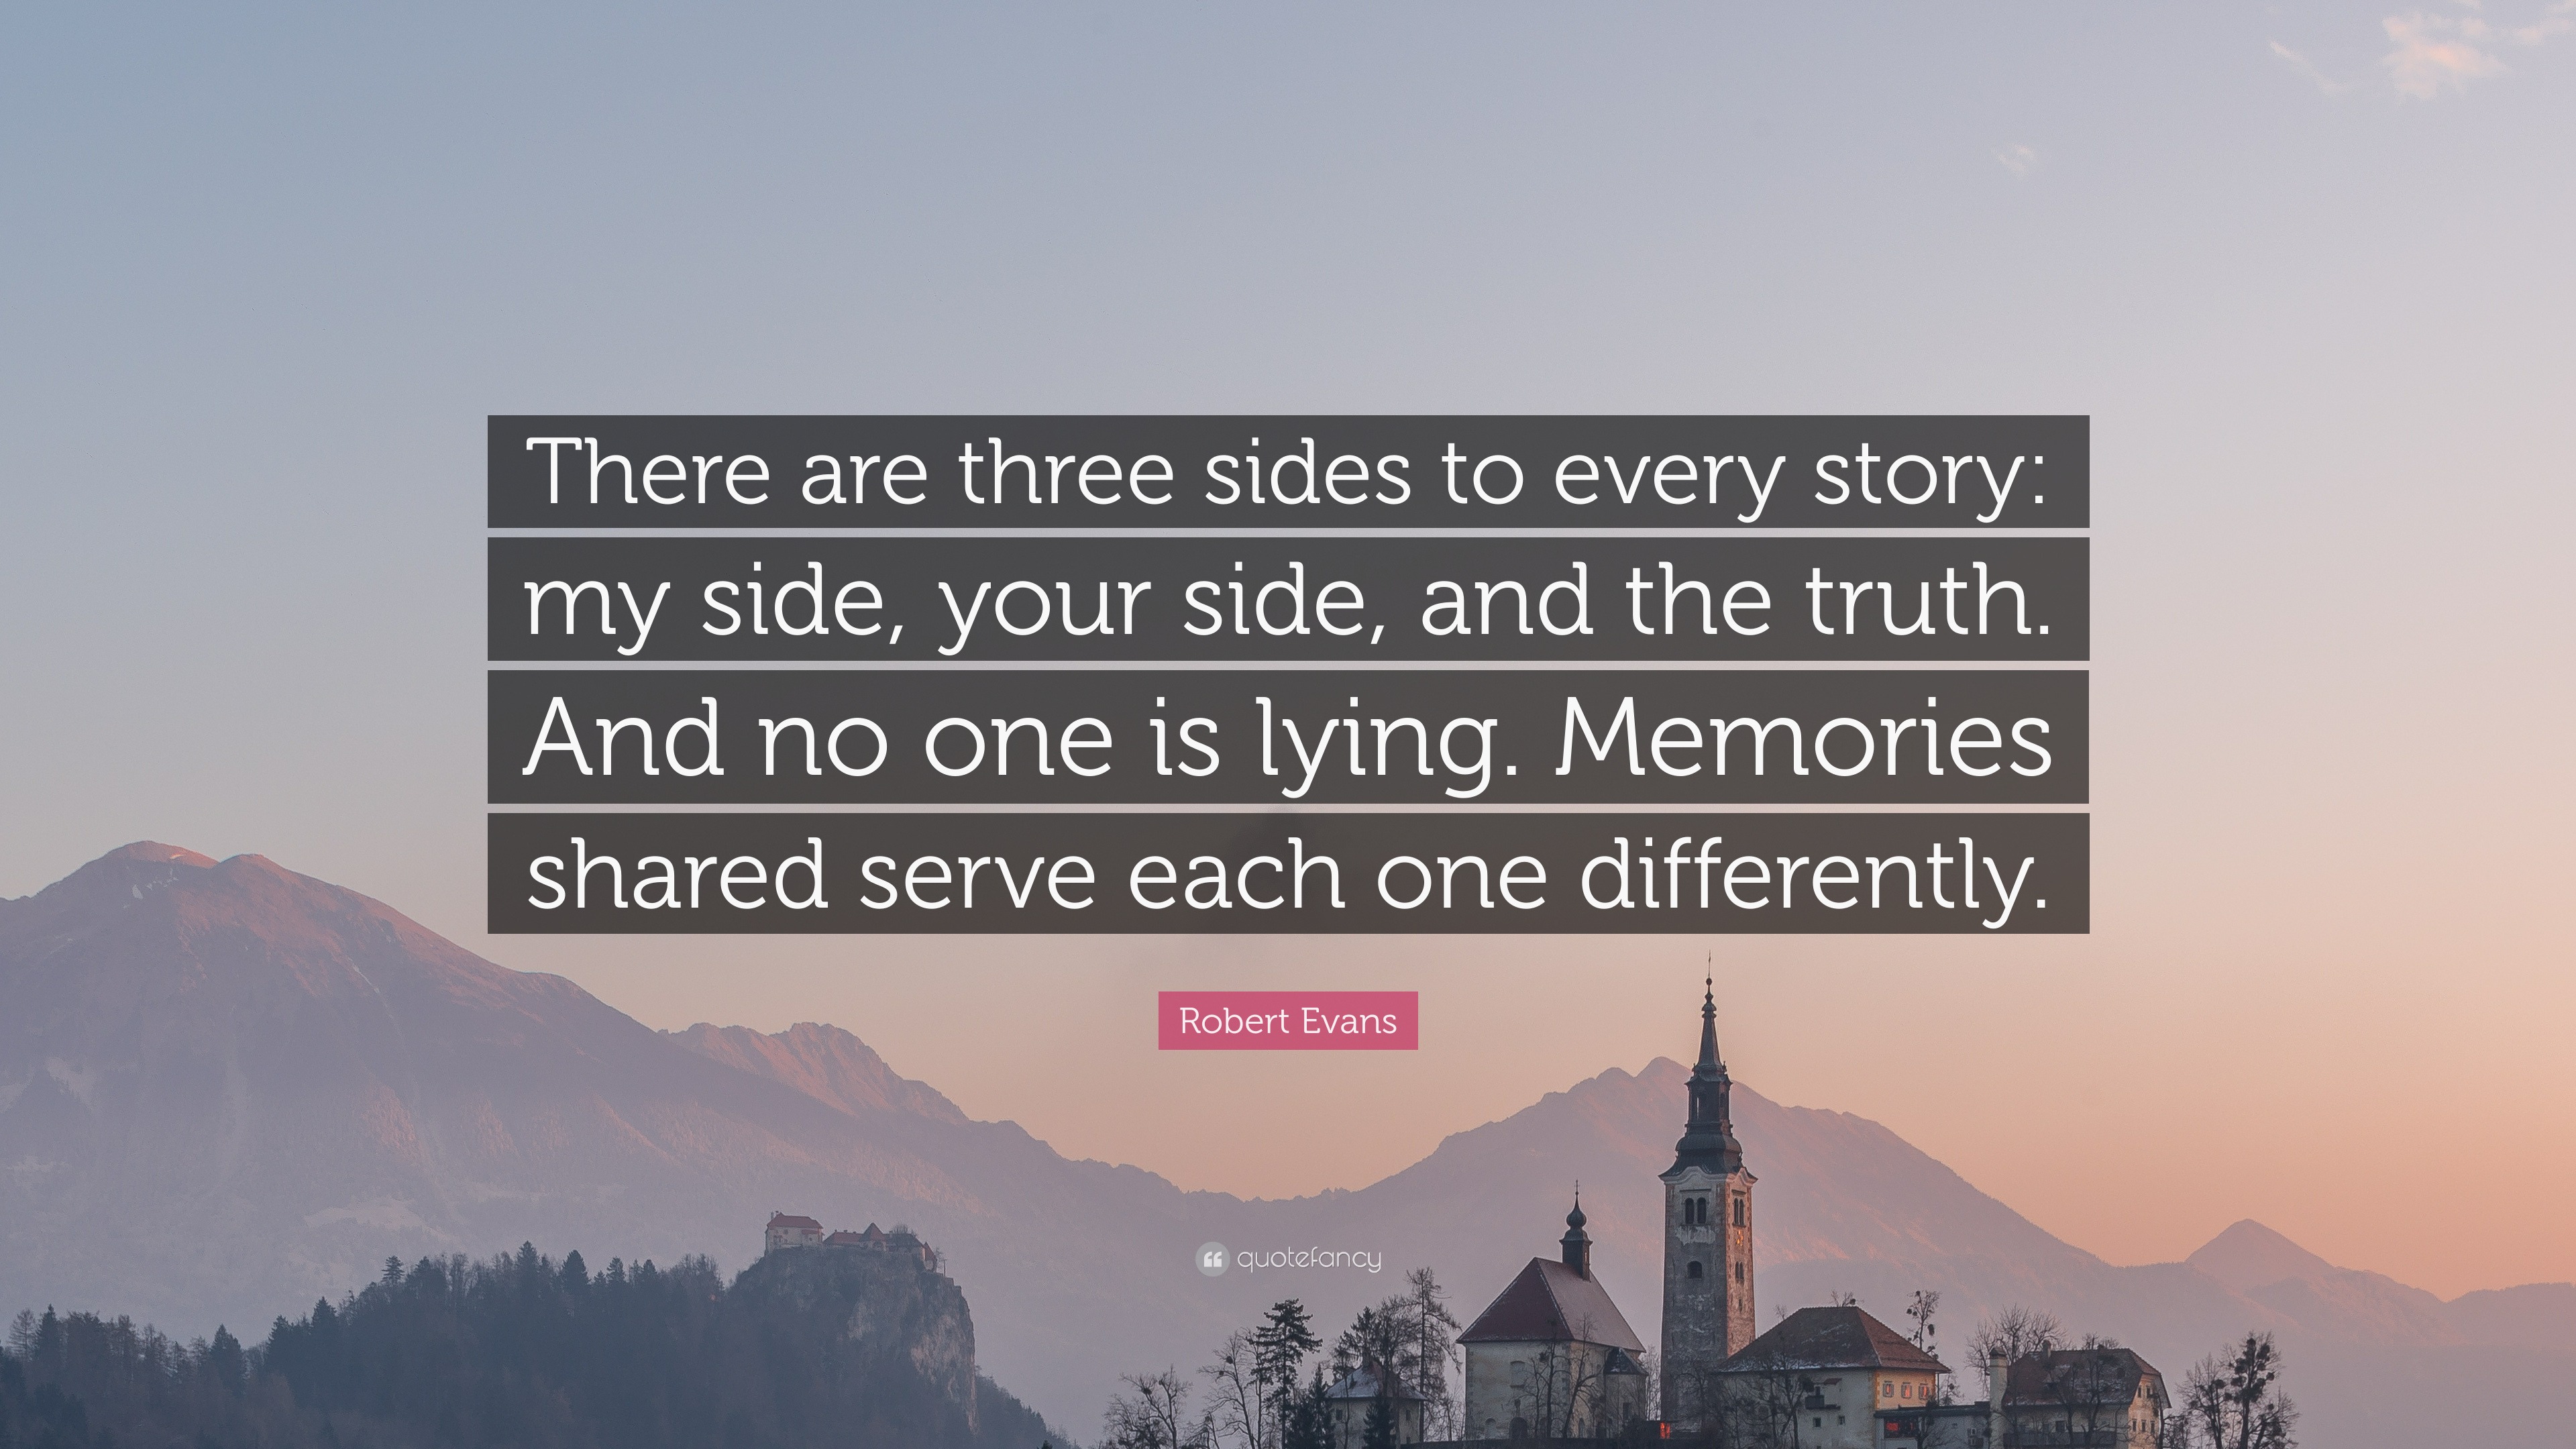 Robert Evans Quote: "There are three sides to every story ...